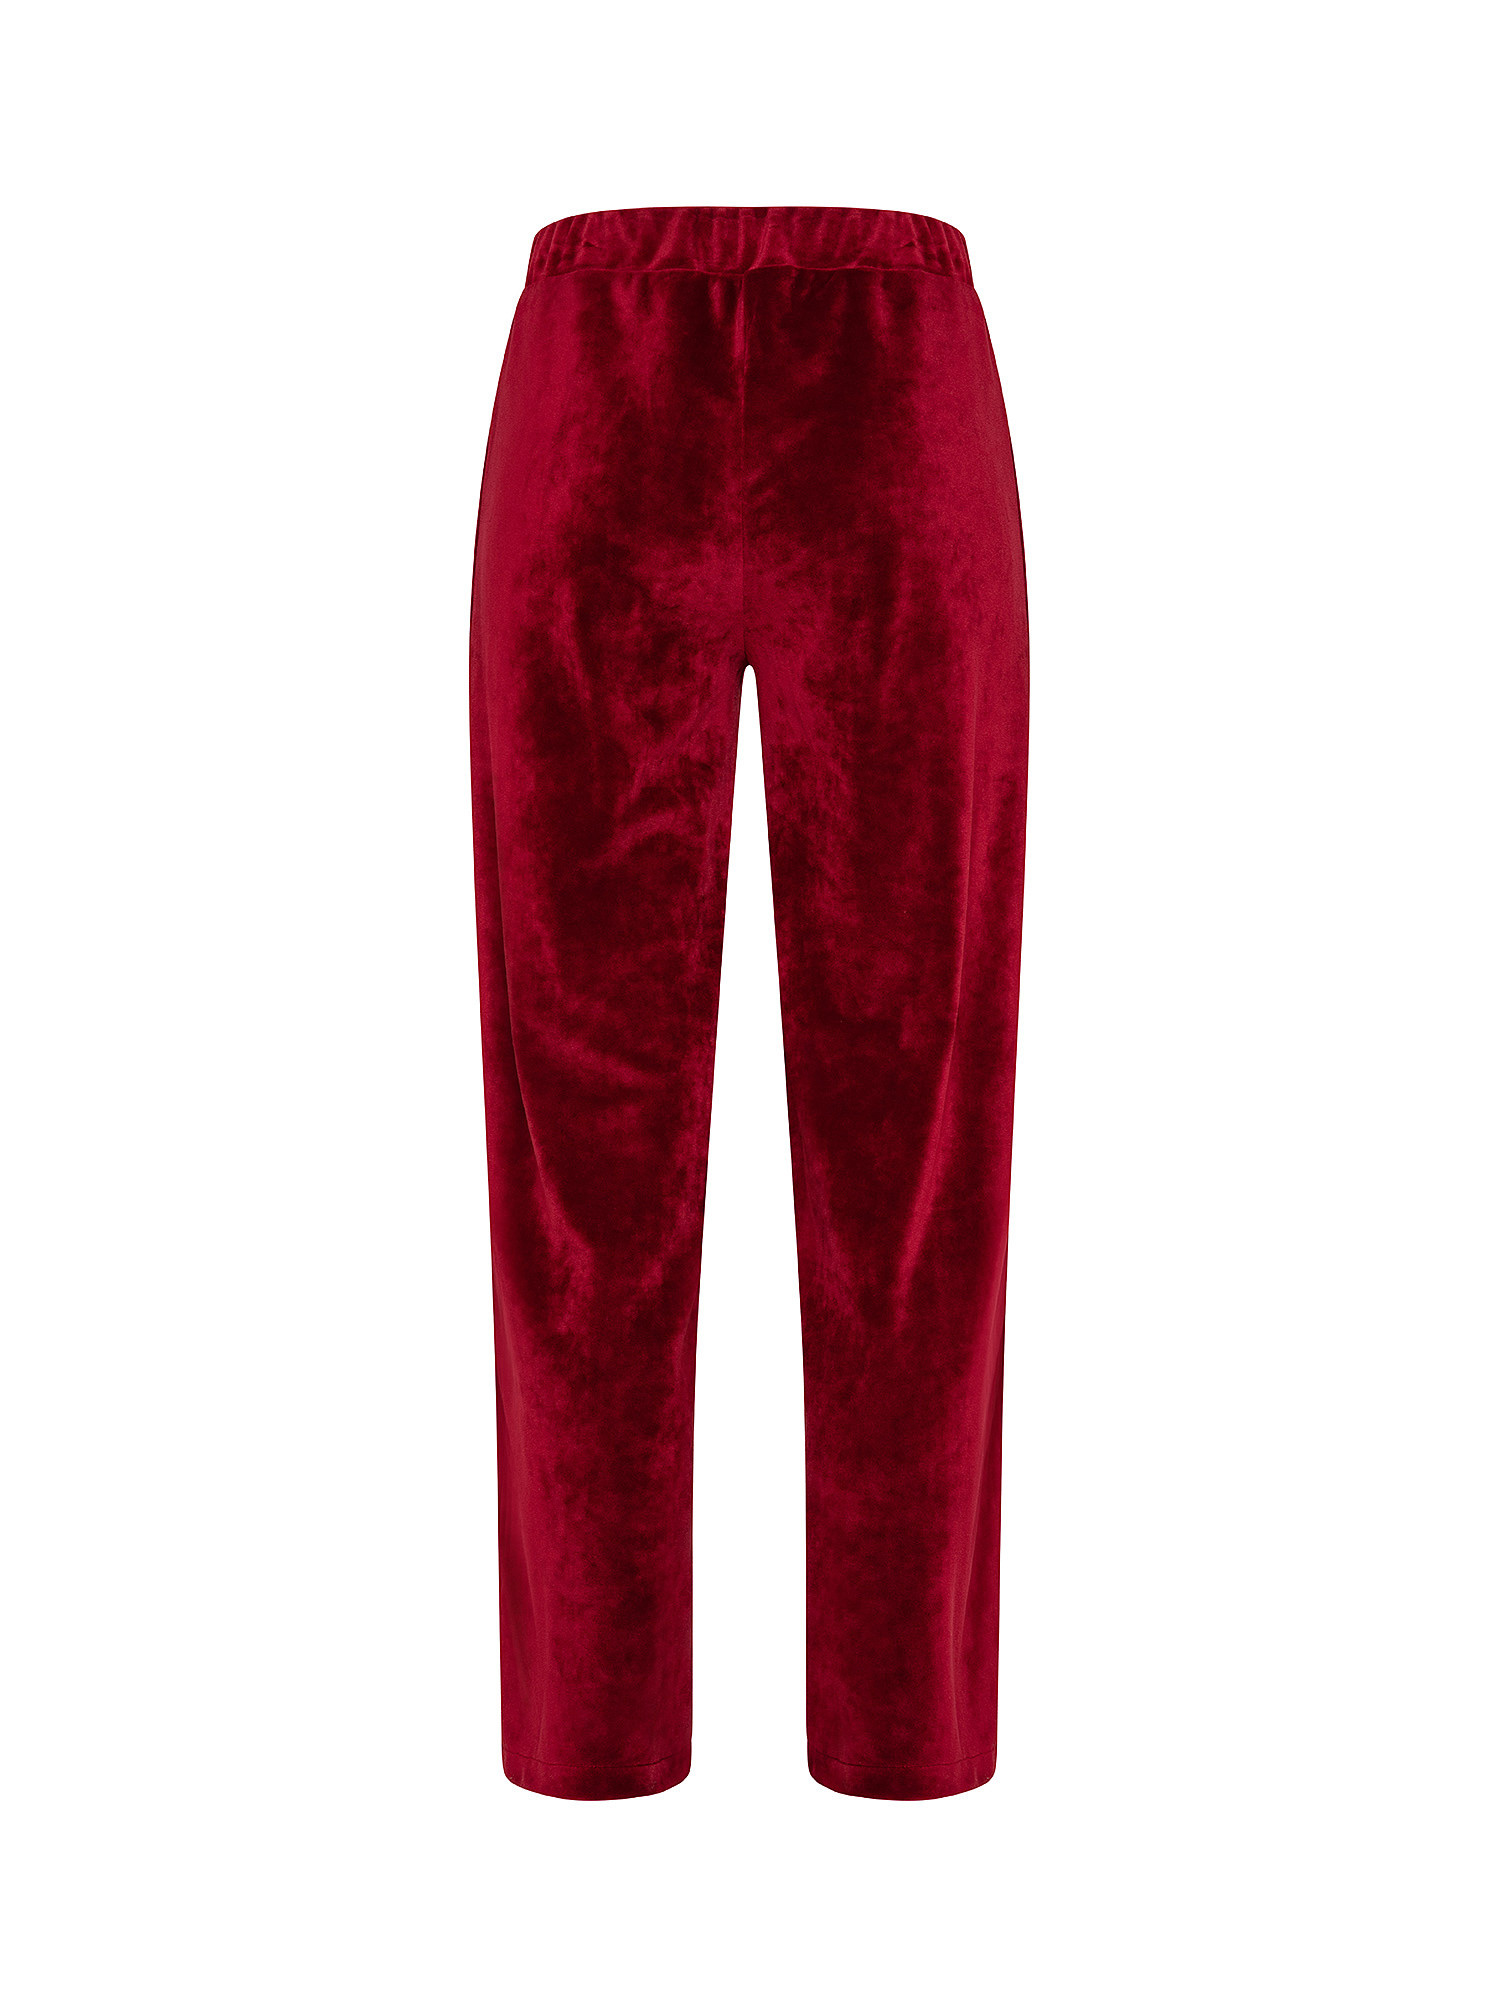 Pantalone in ciniglia, Rosso bordeaux, large image number 1